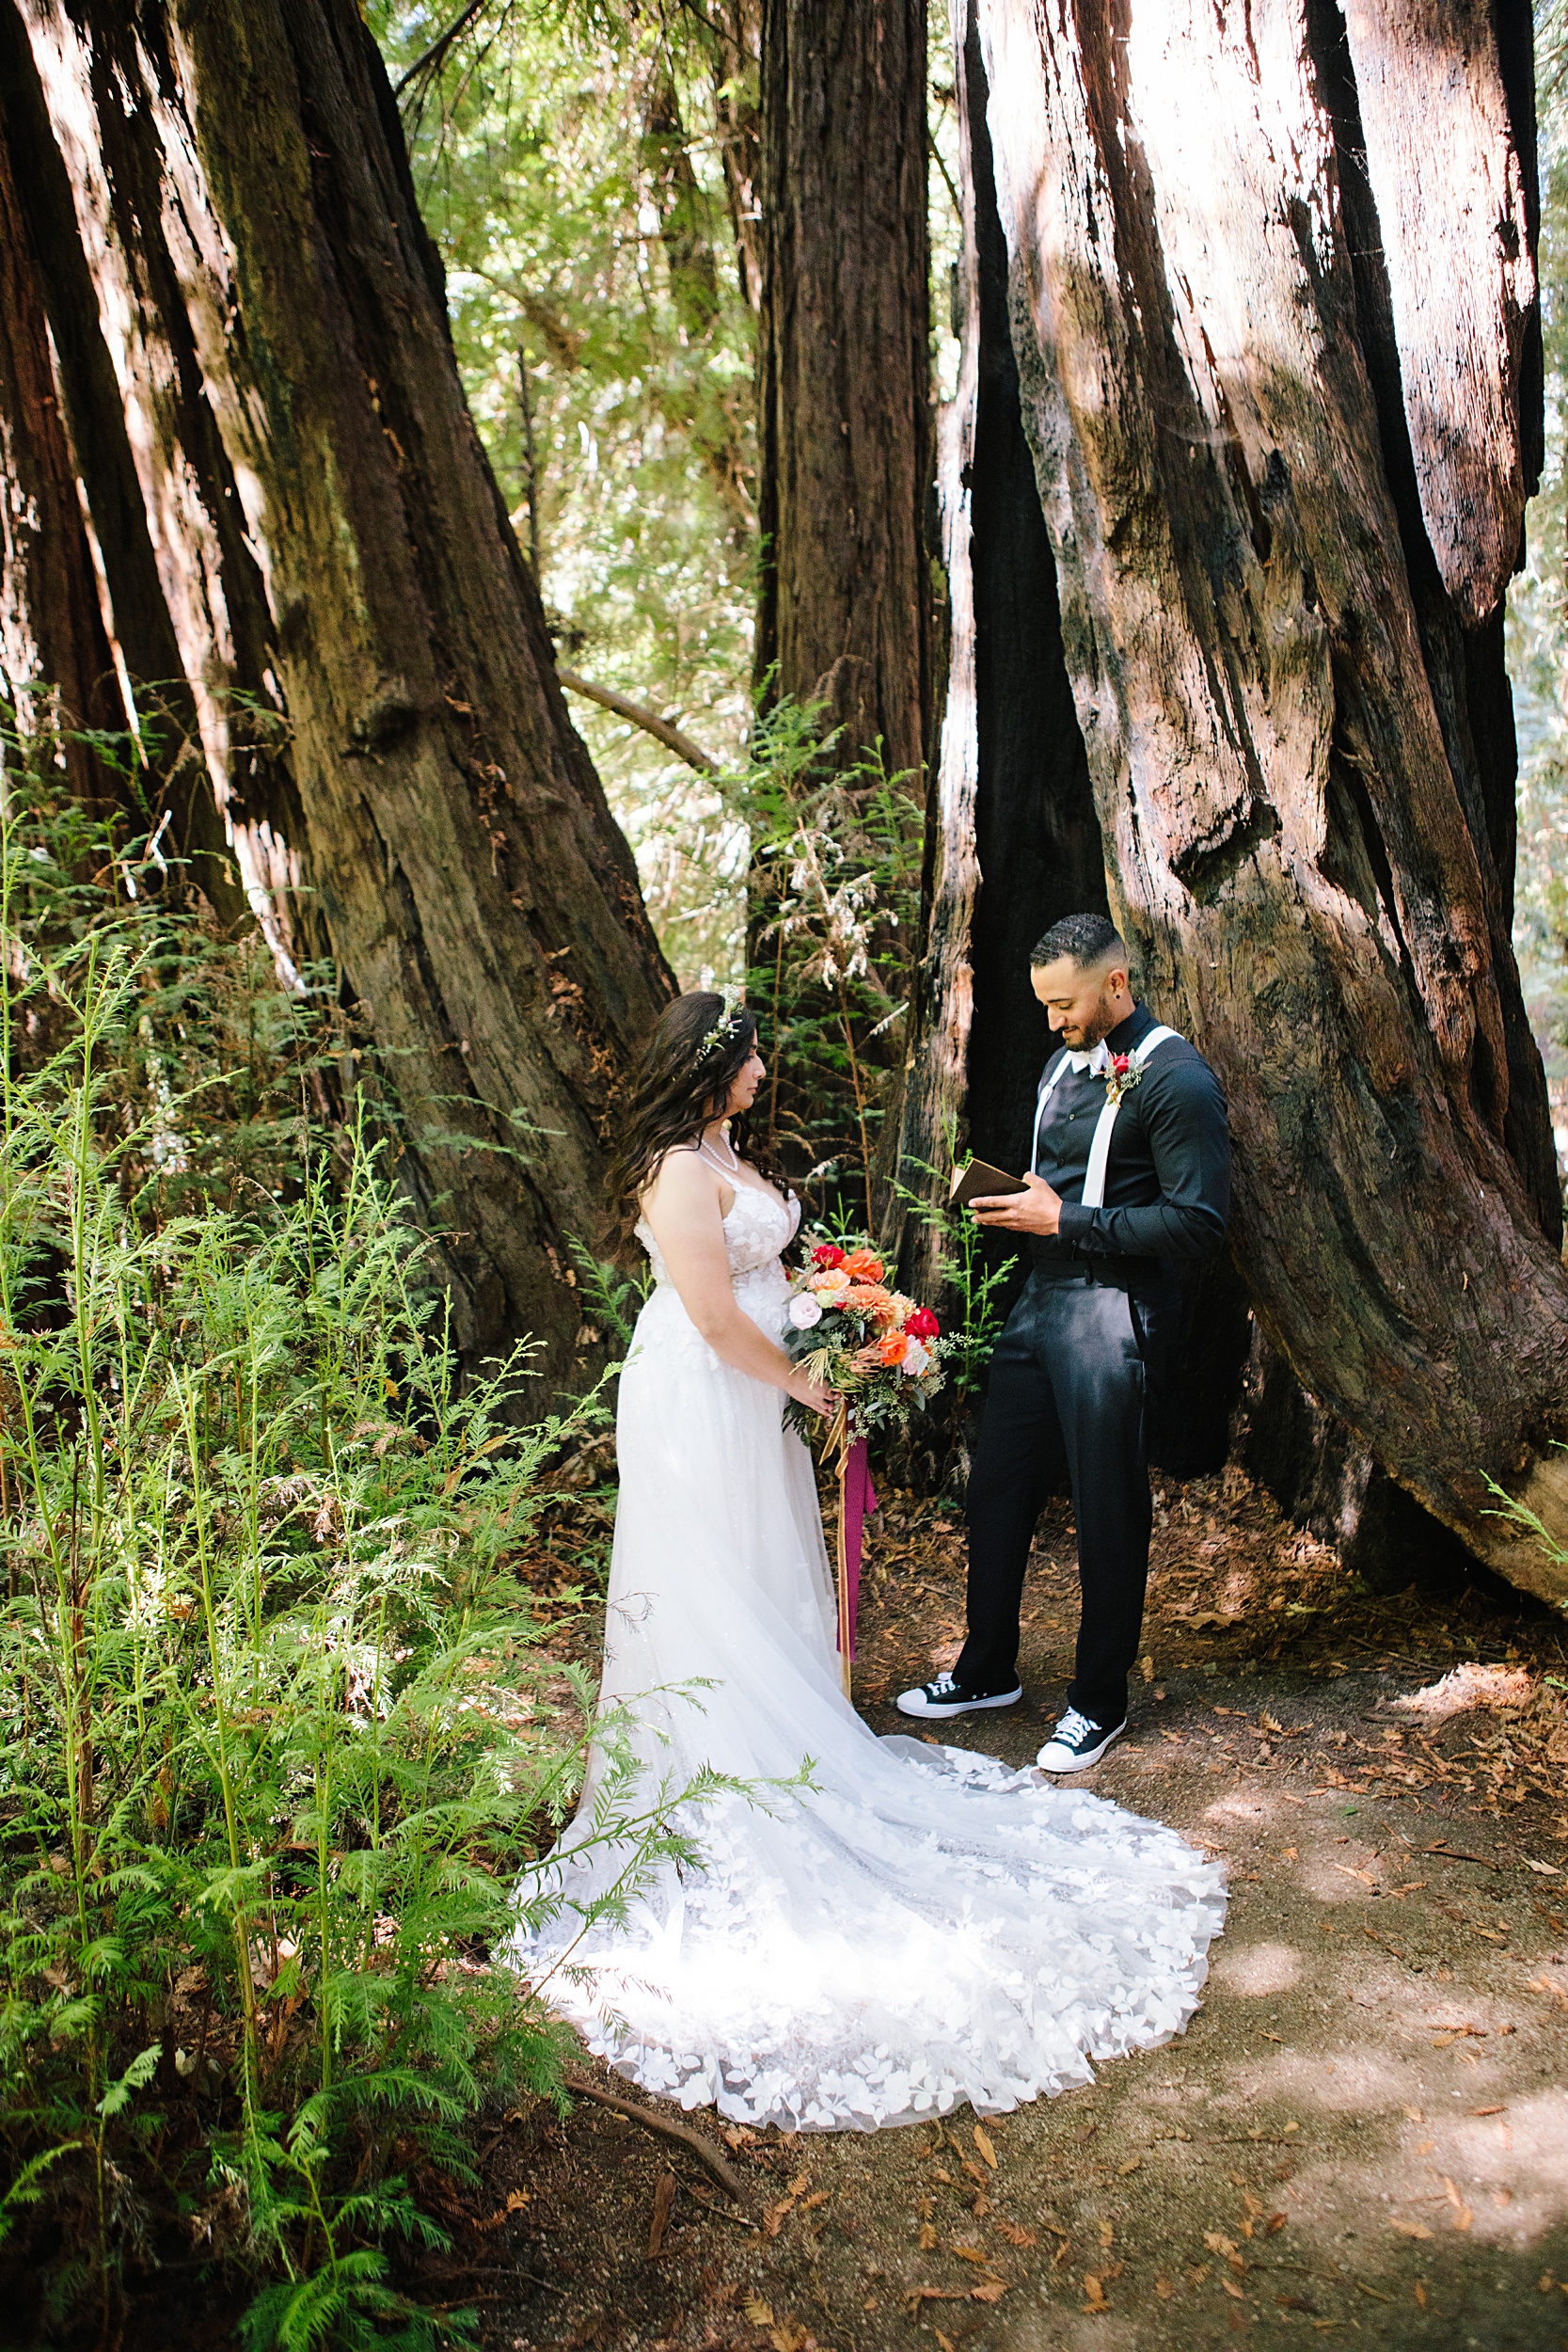 10-Best-Places-to-Elope-In-California_0003 Northern California Elopement Guide: Best Places to Elope